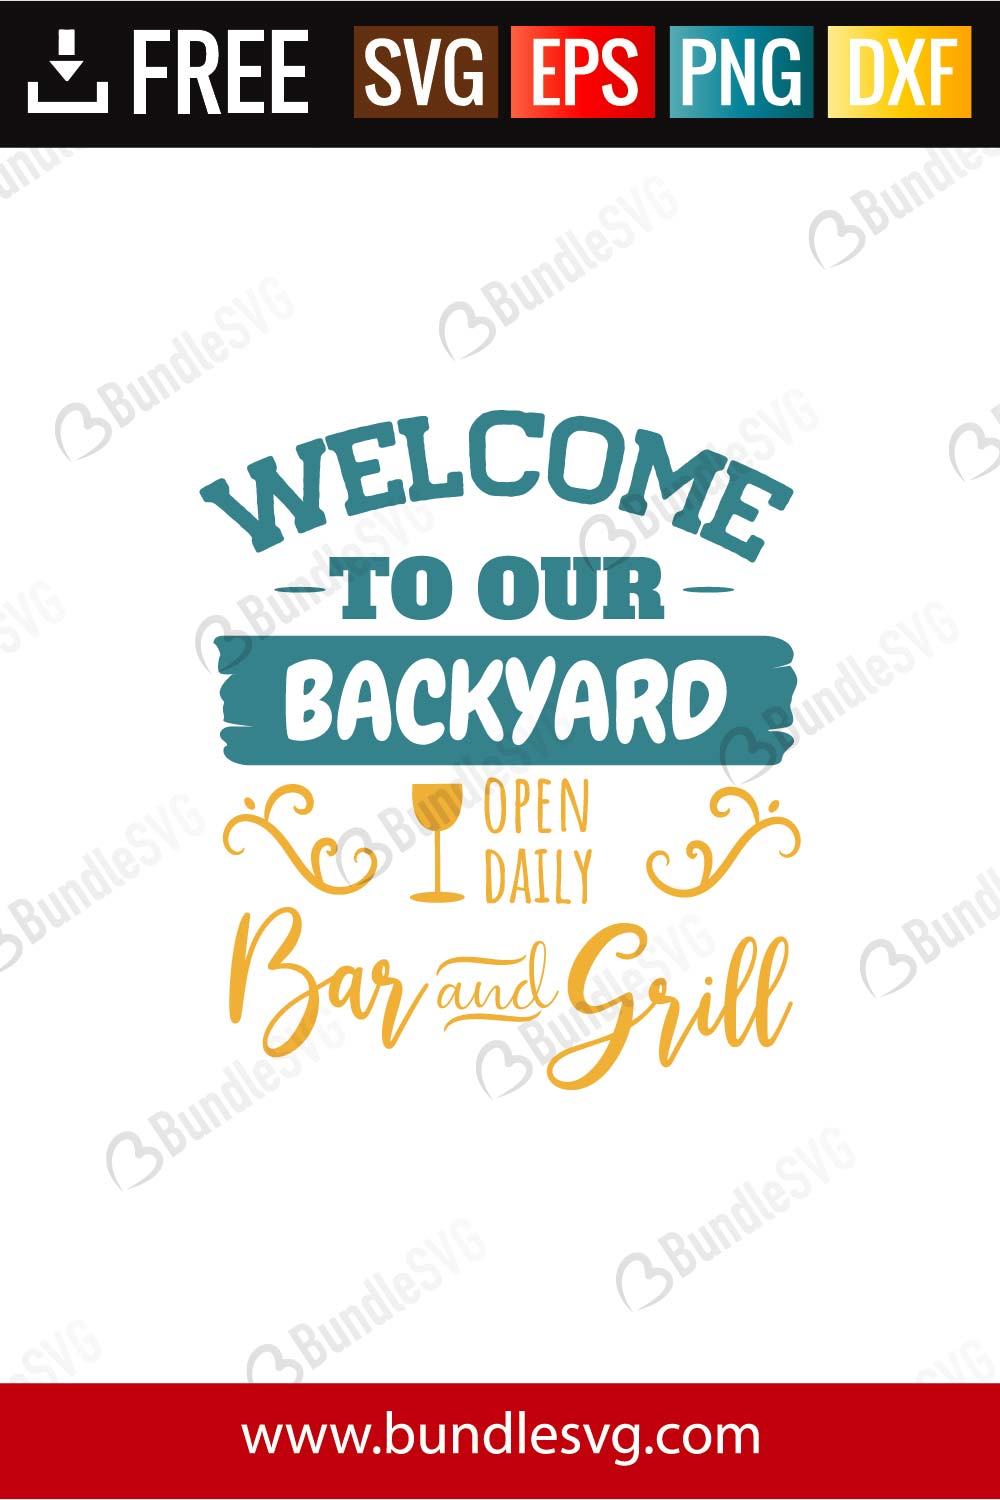 Download Welcome To Our Backyard Open Daily Bar And Grill Svg Cut Files Bundlesvg